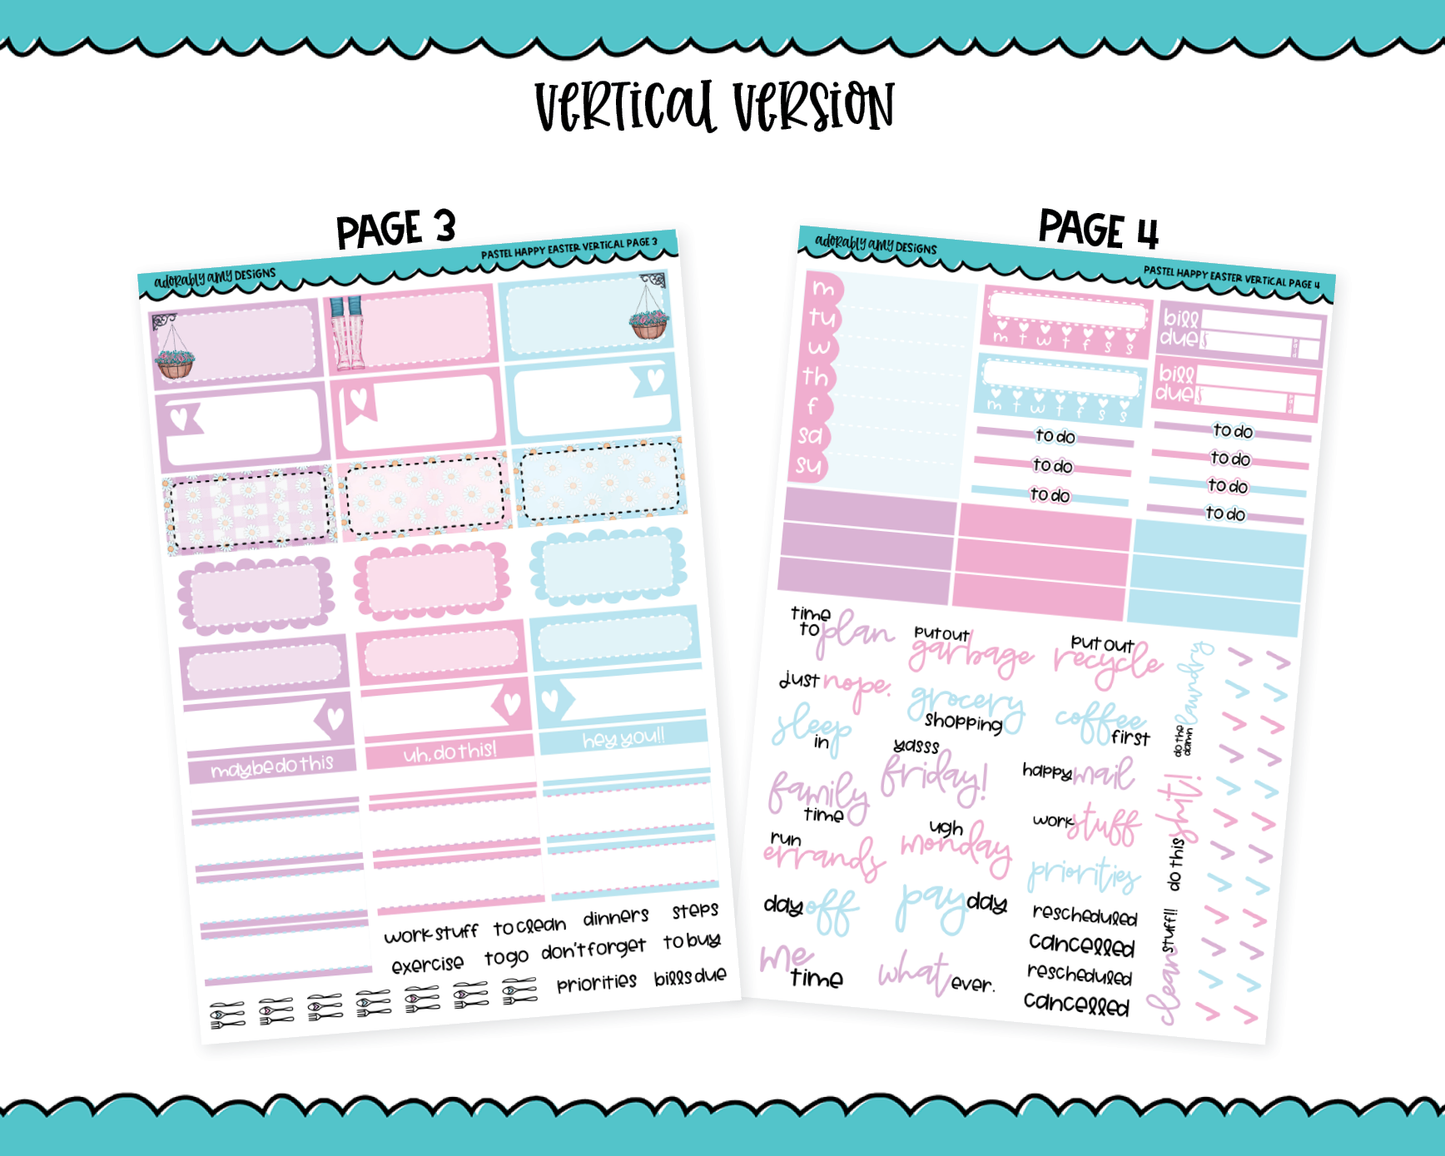 Vertical Pastel Happy Easter Spring Themed Planner Sticker Kit for Vertical Standard Size Planners or Inserts